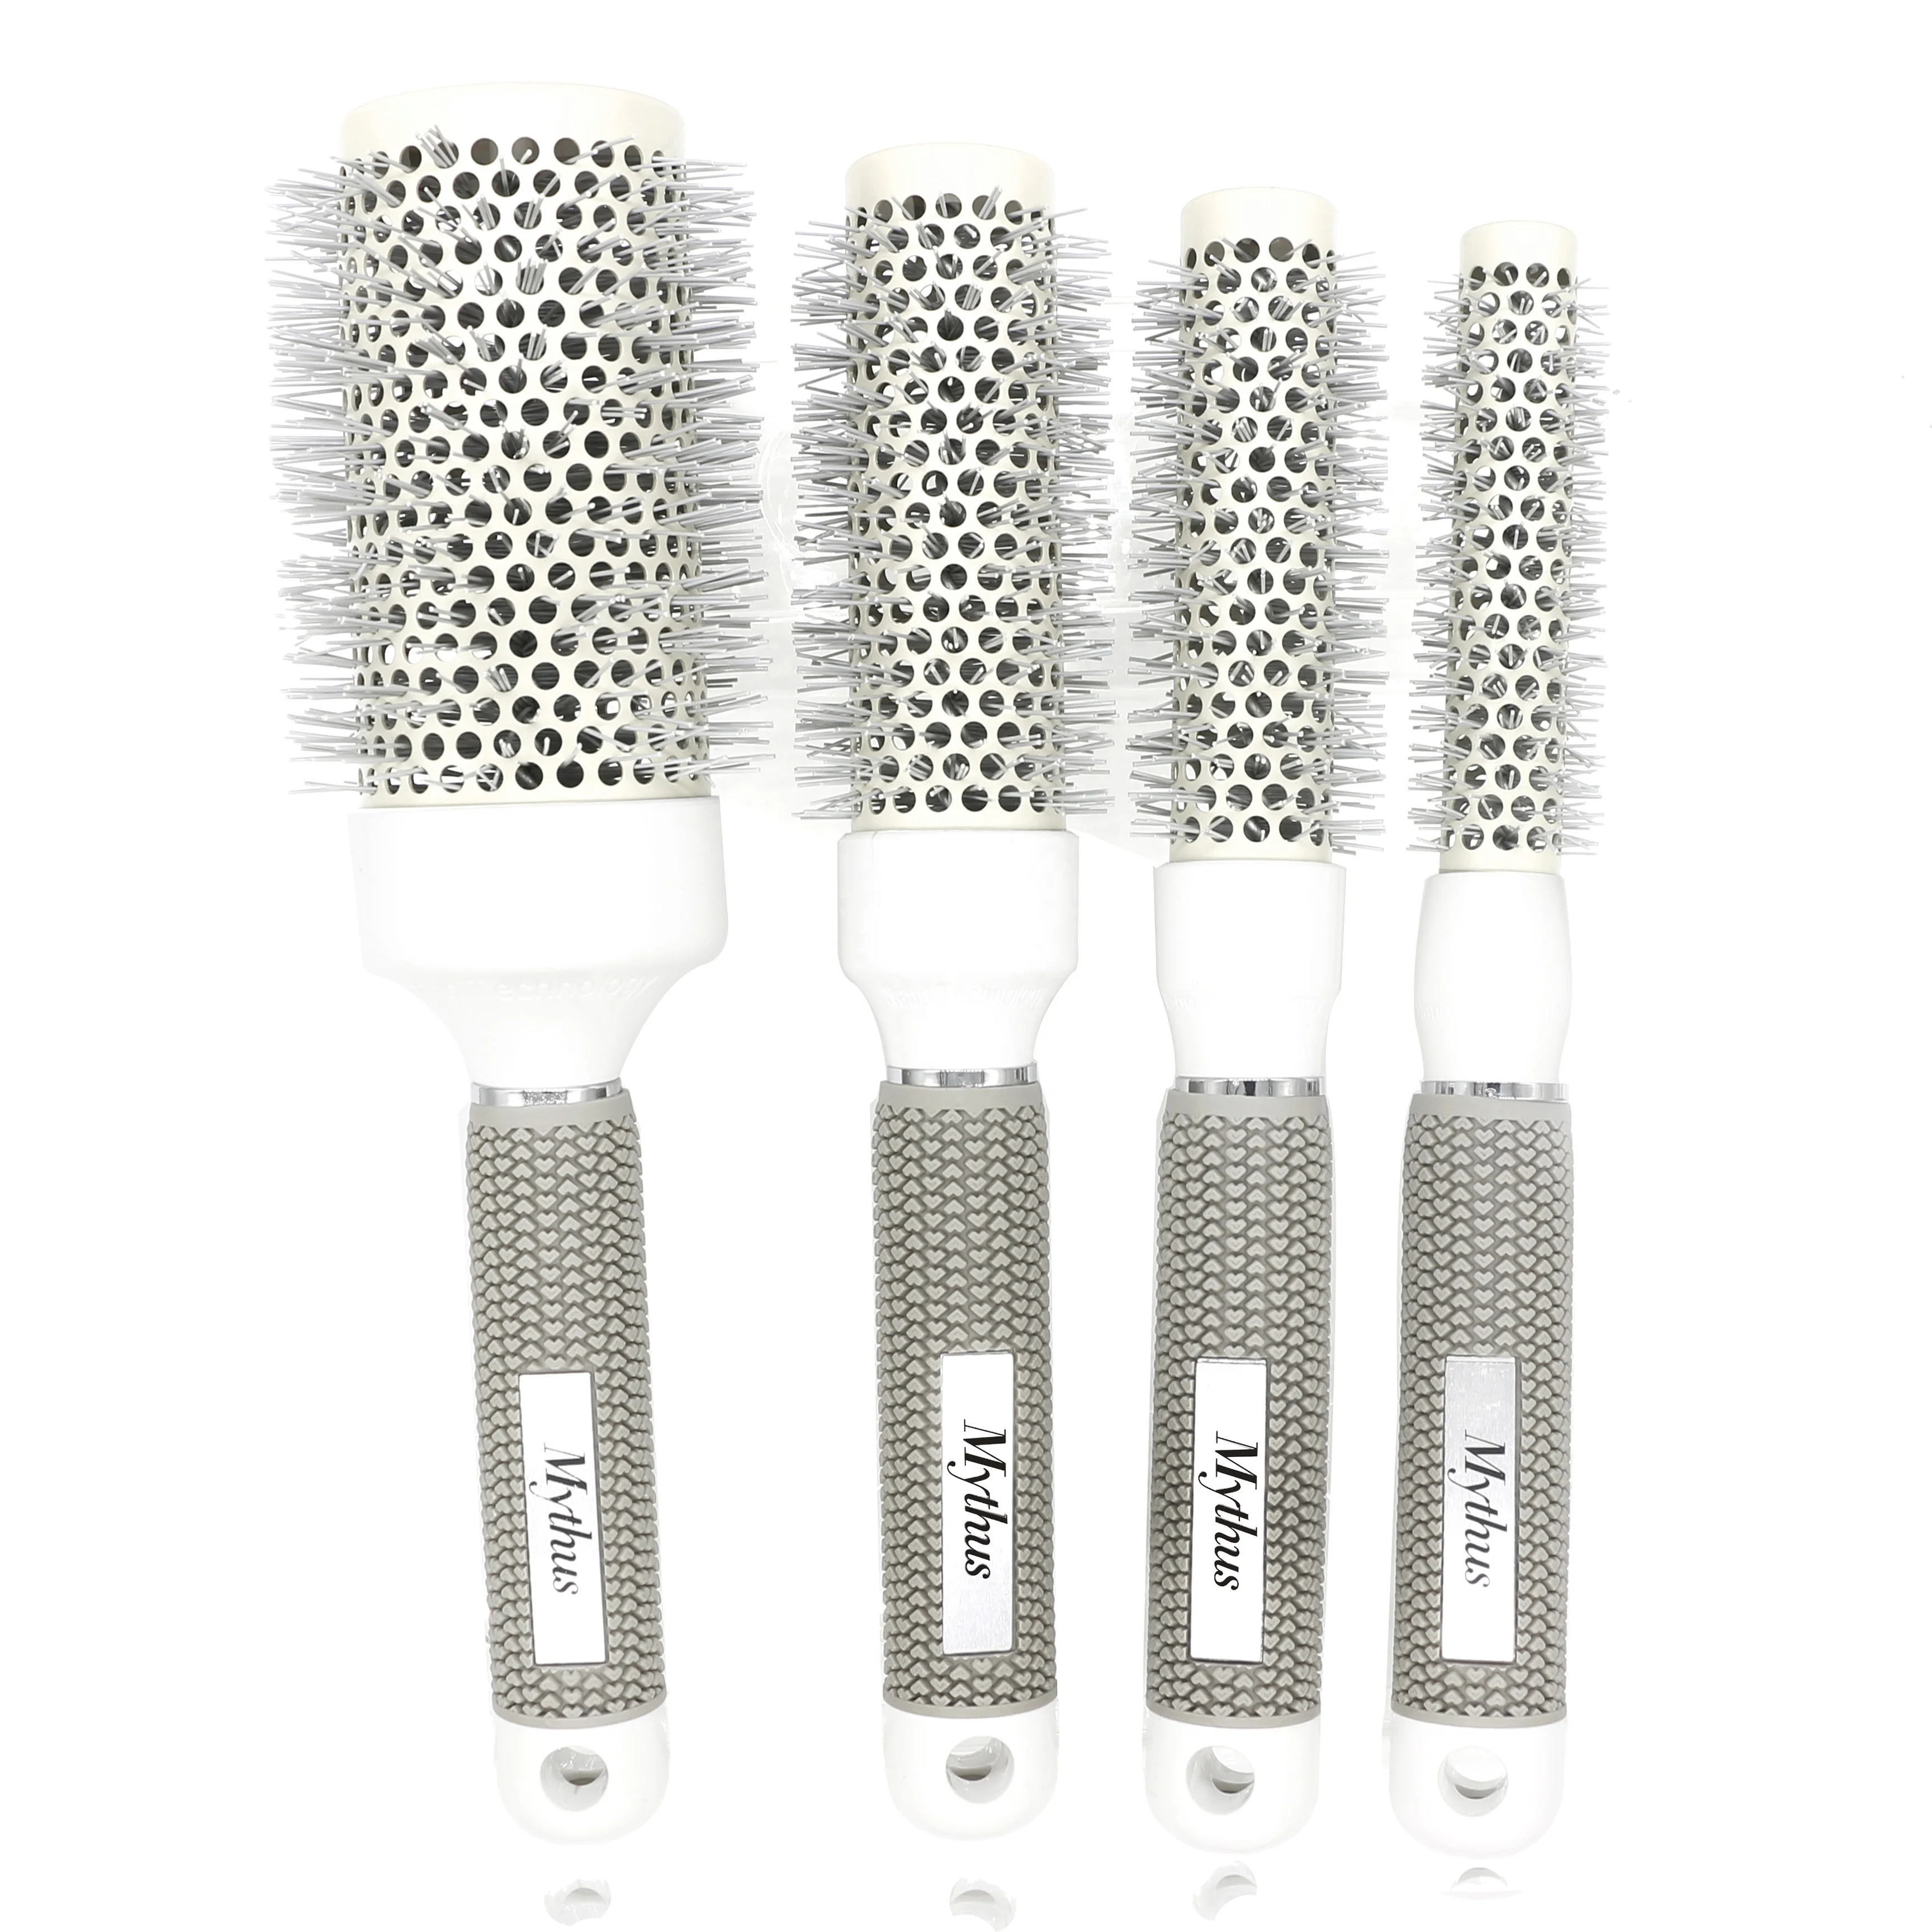 

Salon Barber Hair Dressing Round Brush Ceramic Ionic Rapid Shaping Curl Hairstyle Styling Comb, Grey